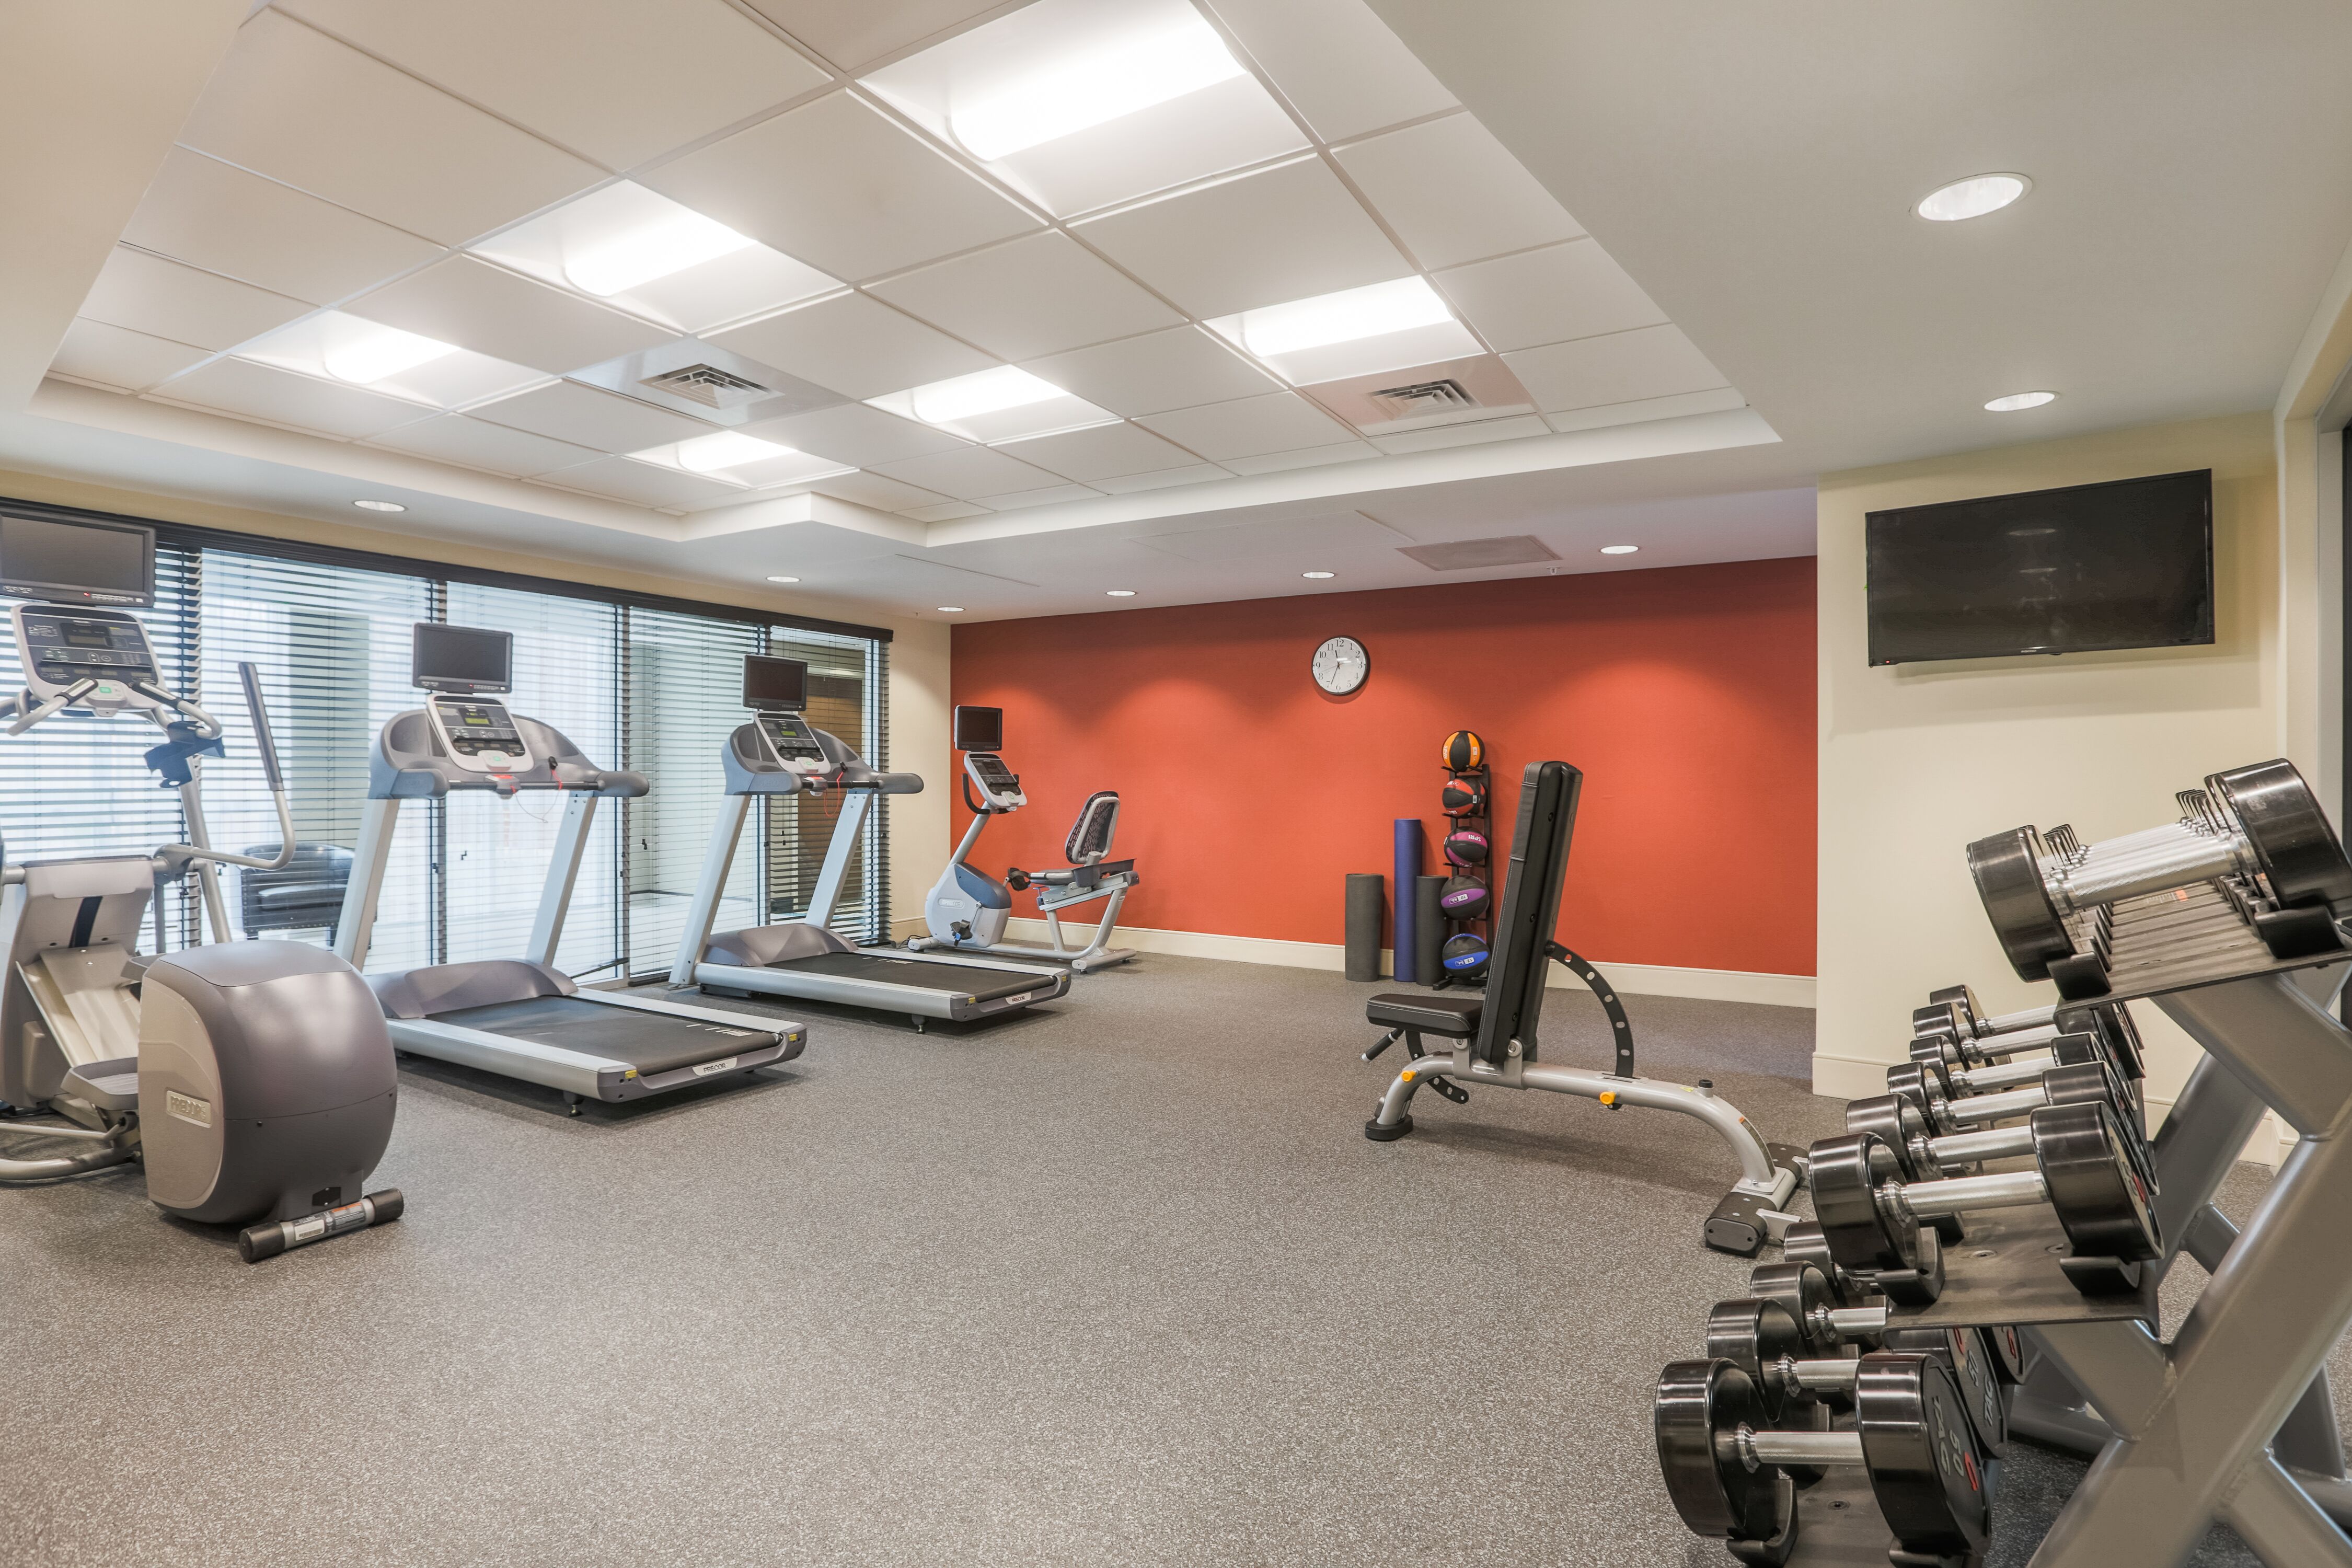 Fitness Center With Cardio Equipment, Weight Balls, Bench, TV and  Free Weights